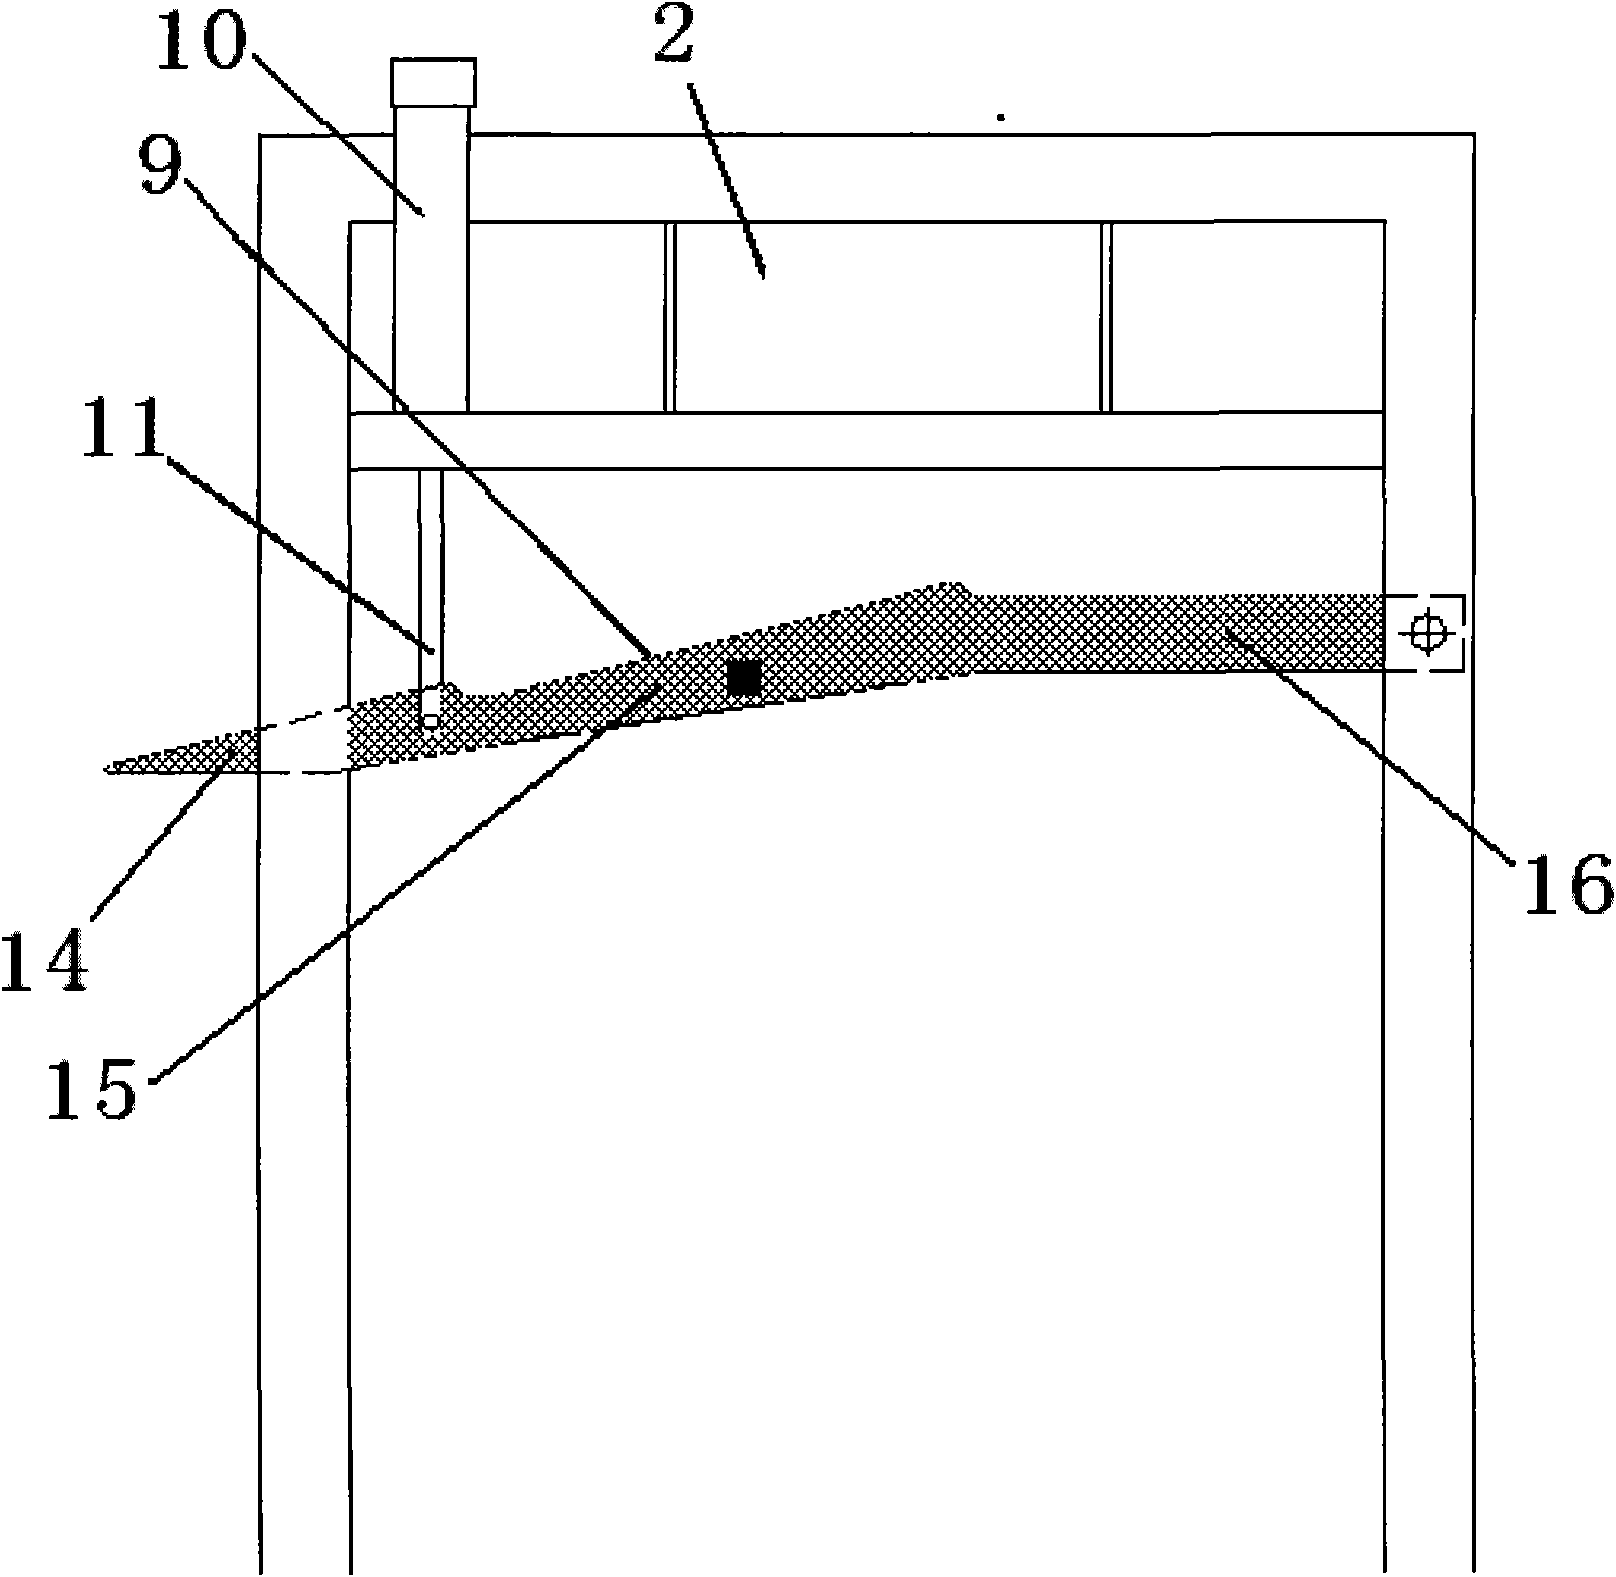 Automatically covering/uncovering system of steel ladle